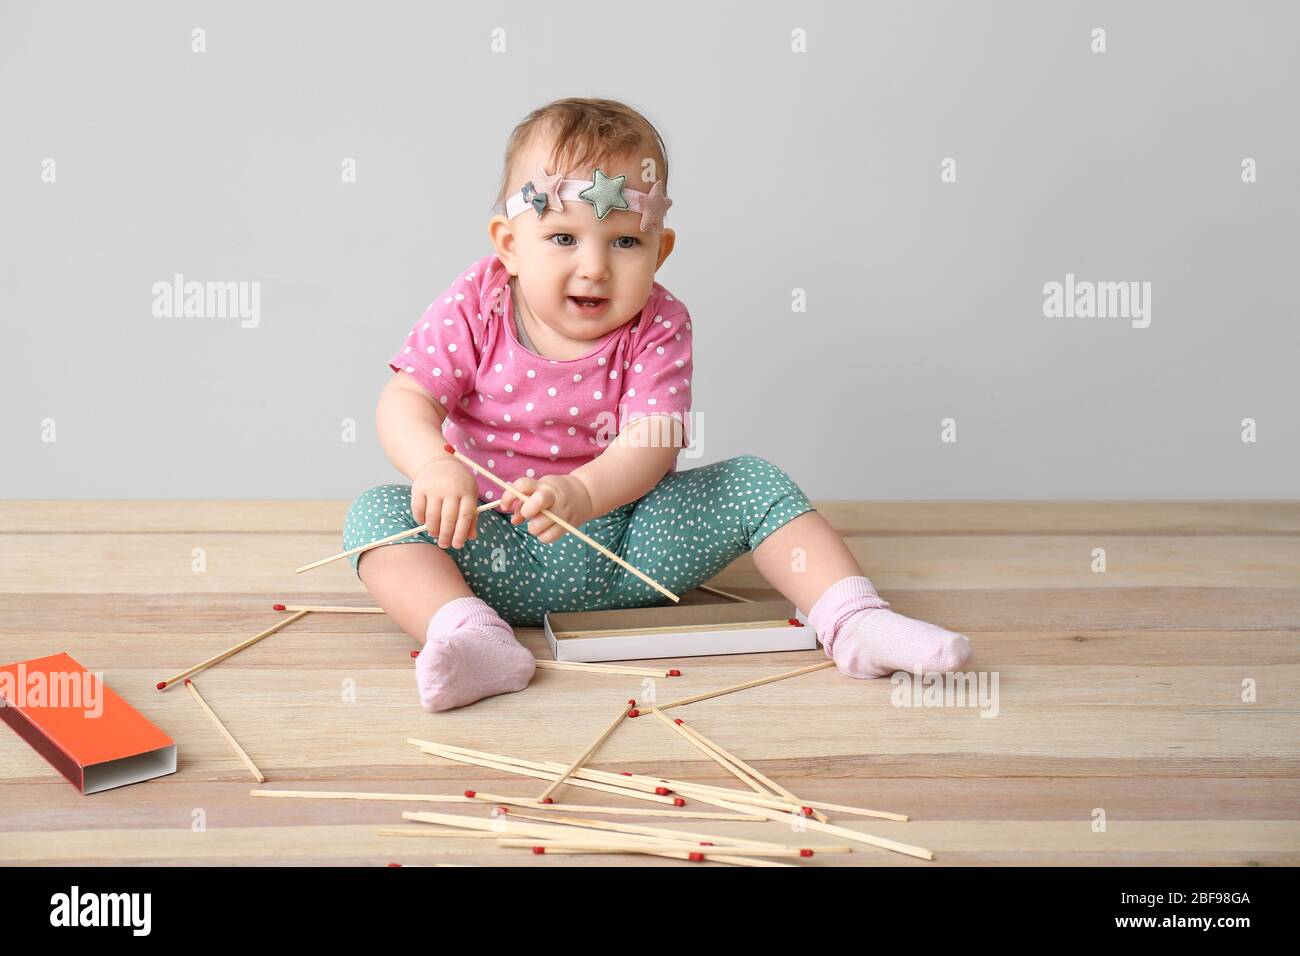 Little baby playing with matches while sitting on table. Child in danger Stock Photo